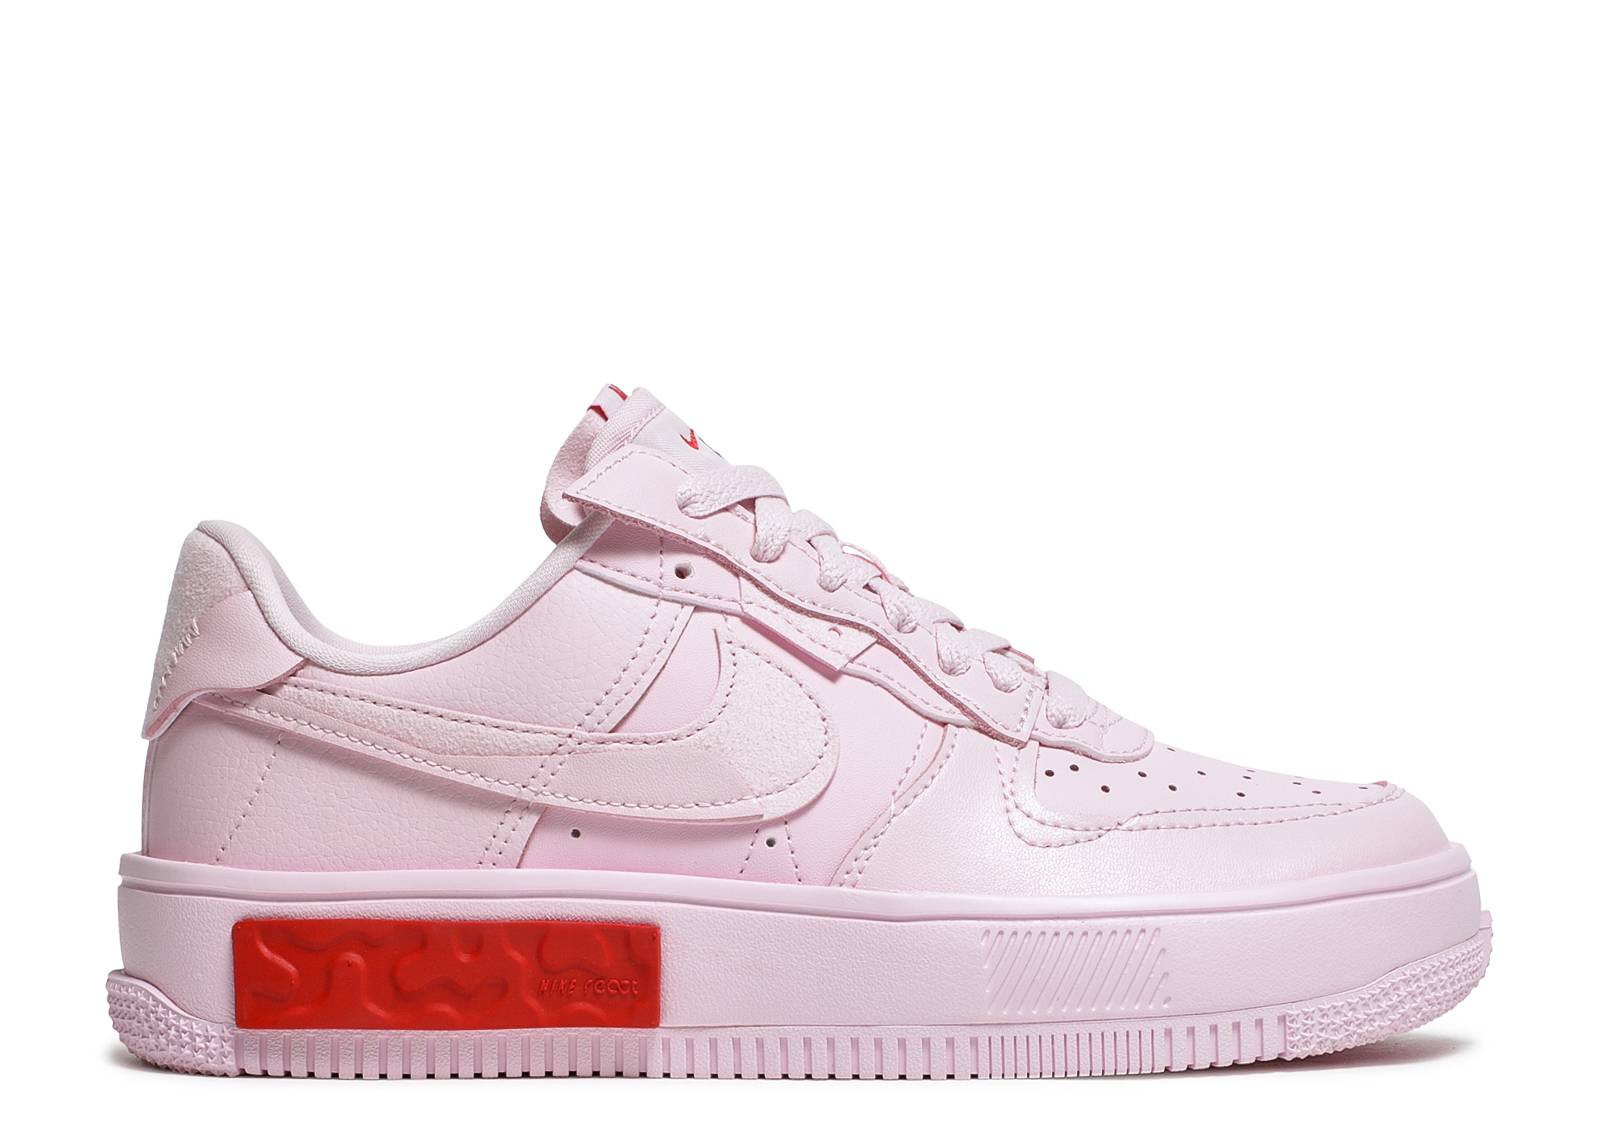 Wmns Air Force 1 Fontanka 'Valentine's Day'Color:Pink,Size:5